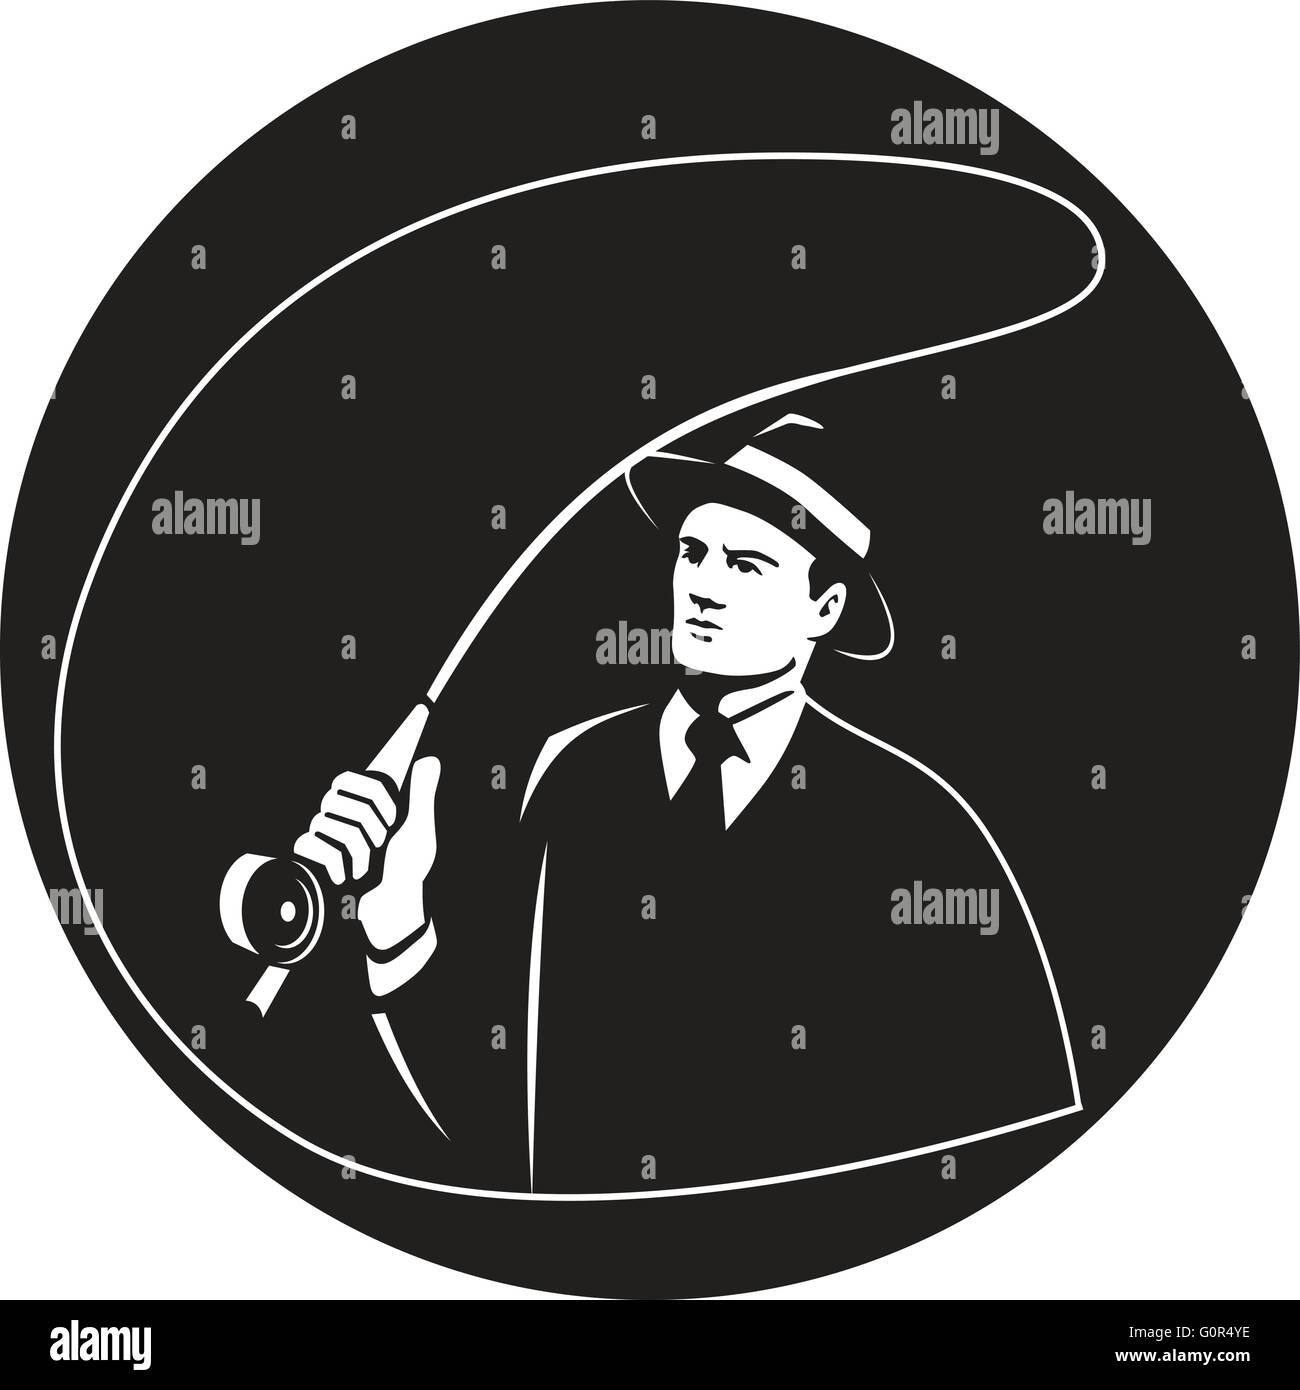 Illustration of a mobster gangster fly fisherman wearing suit, tie and hat fishing casting fly rod set inside circle on isolated background done in retro style. Stock Vector